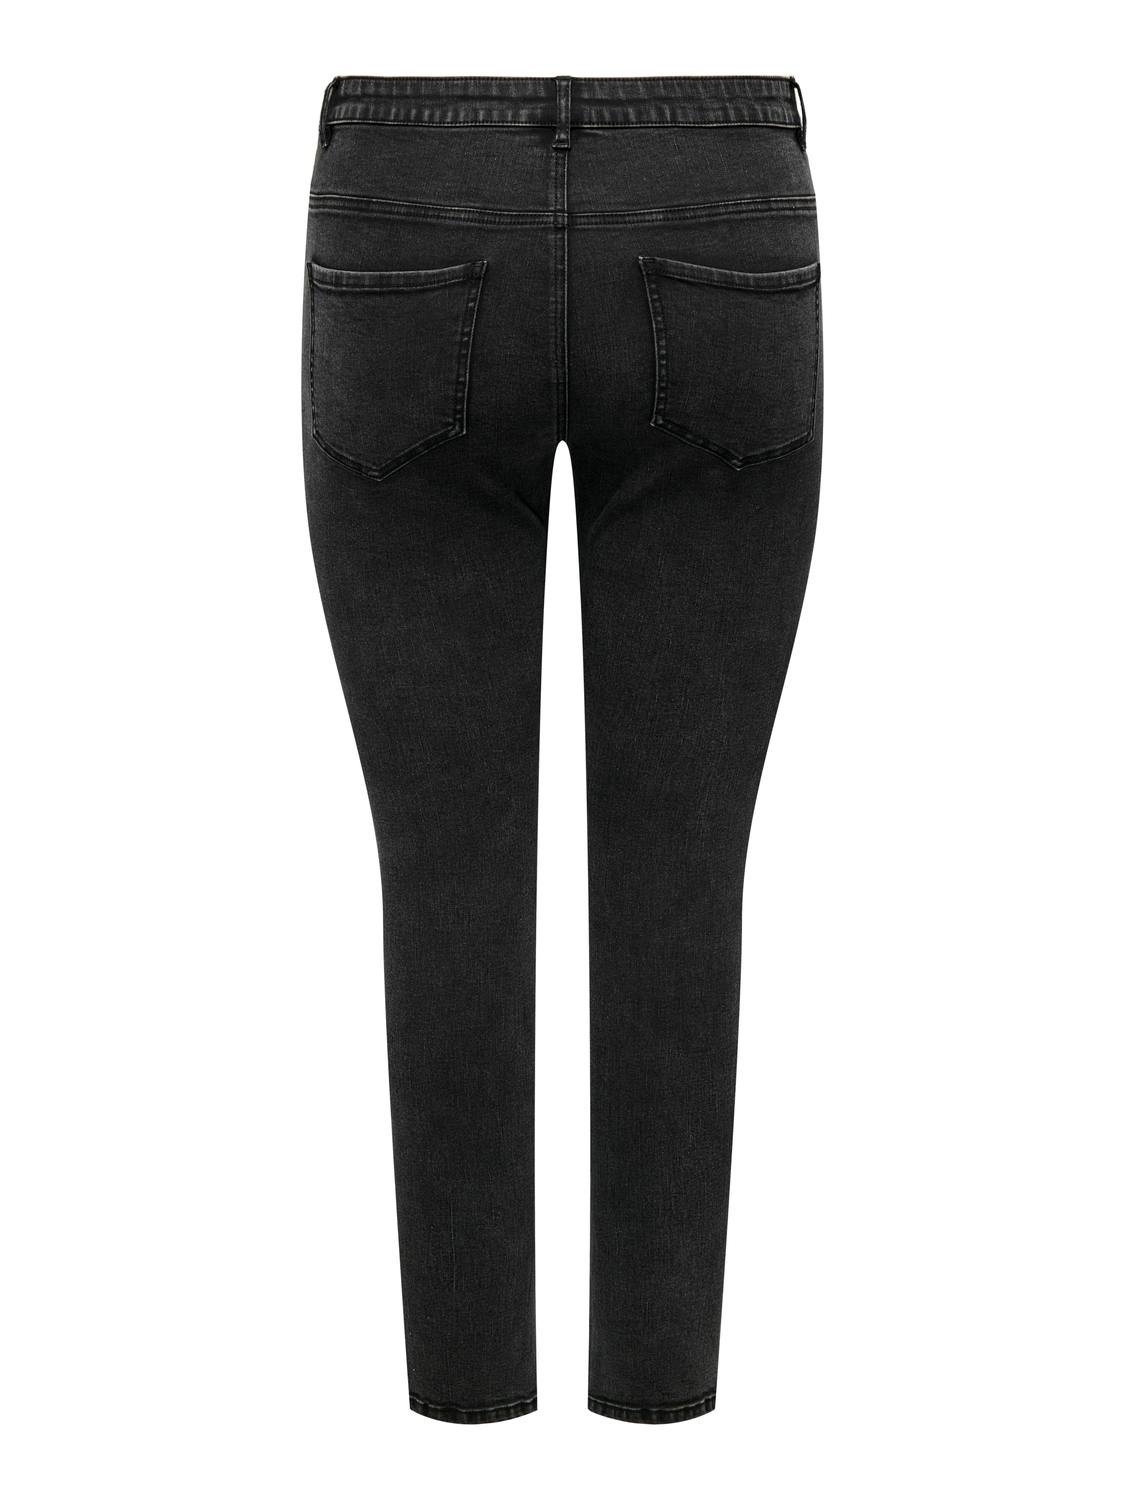 ONLY carrose hw skinny dnm gua940 -Washed Black - 15308803